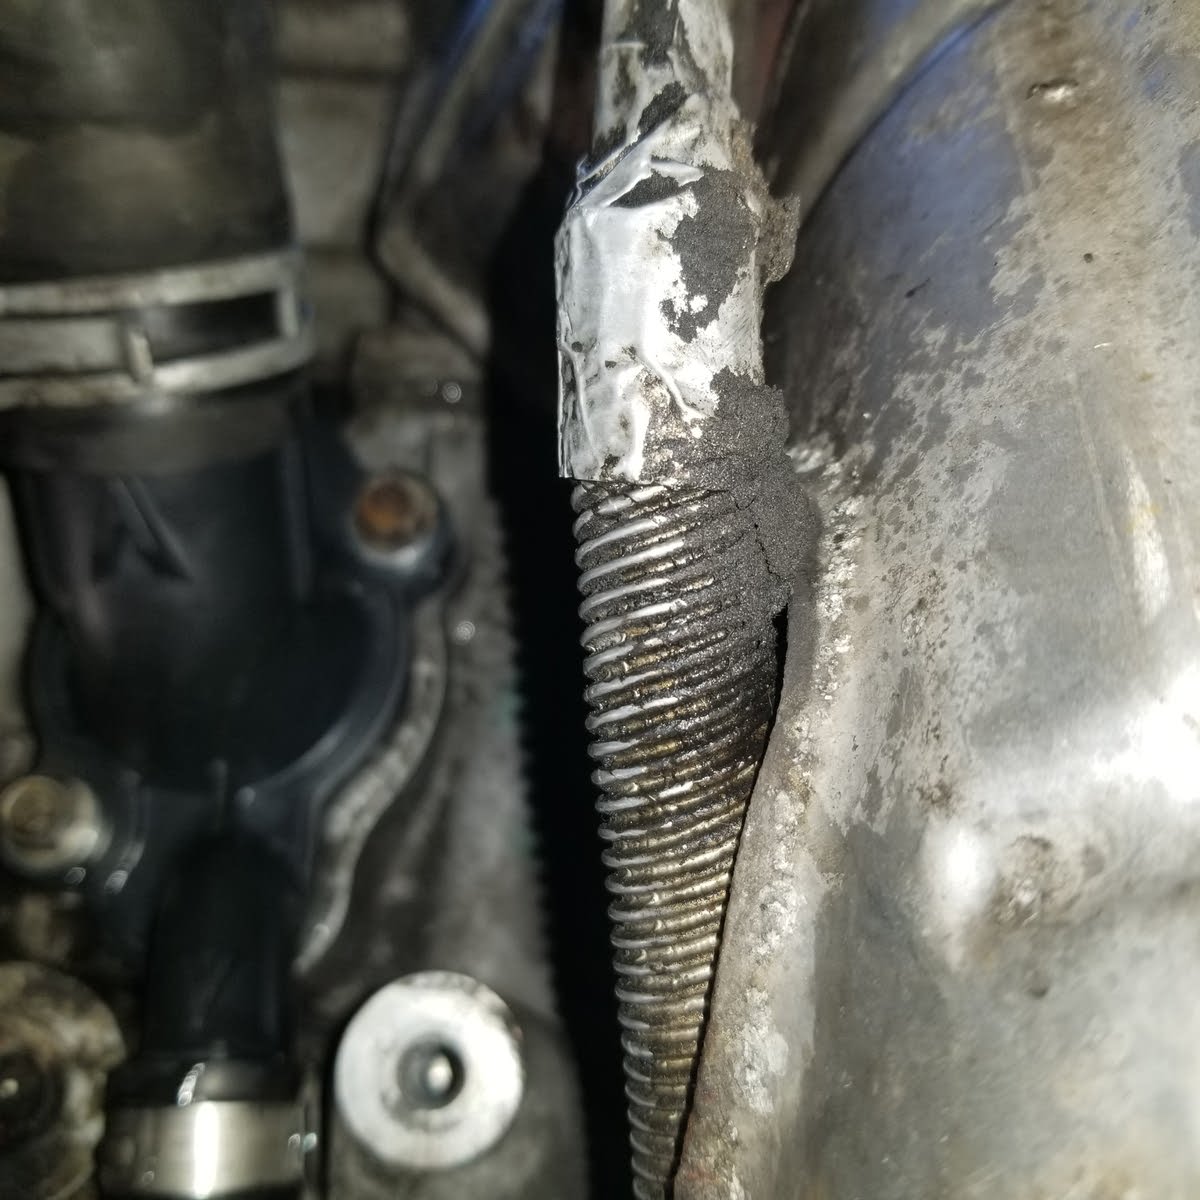 leaking coolant from engine